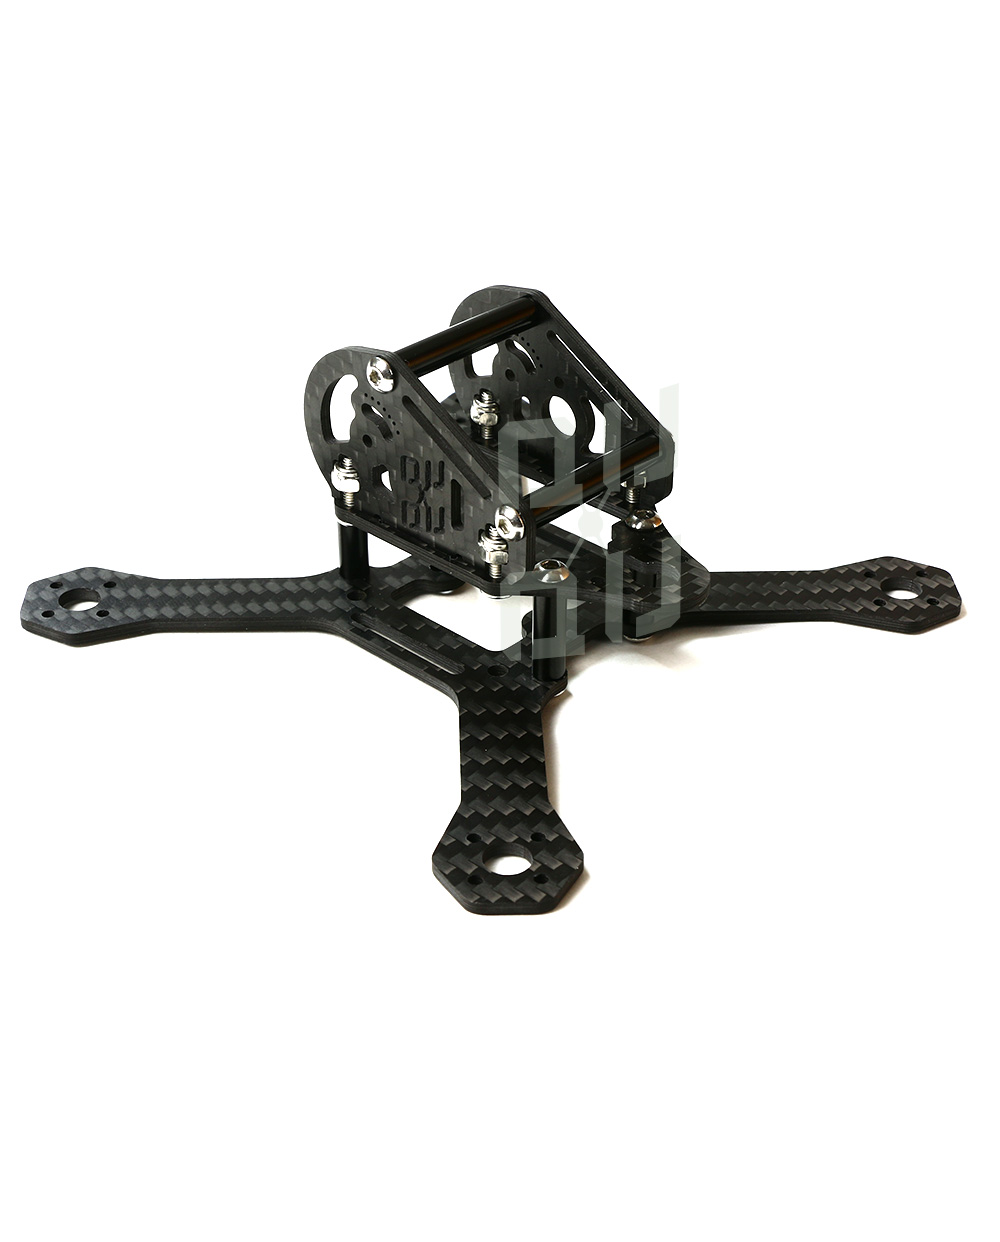 qq130 fully built 3" Racing Drone frame by QuadQuestions rear left view 2